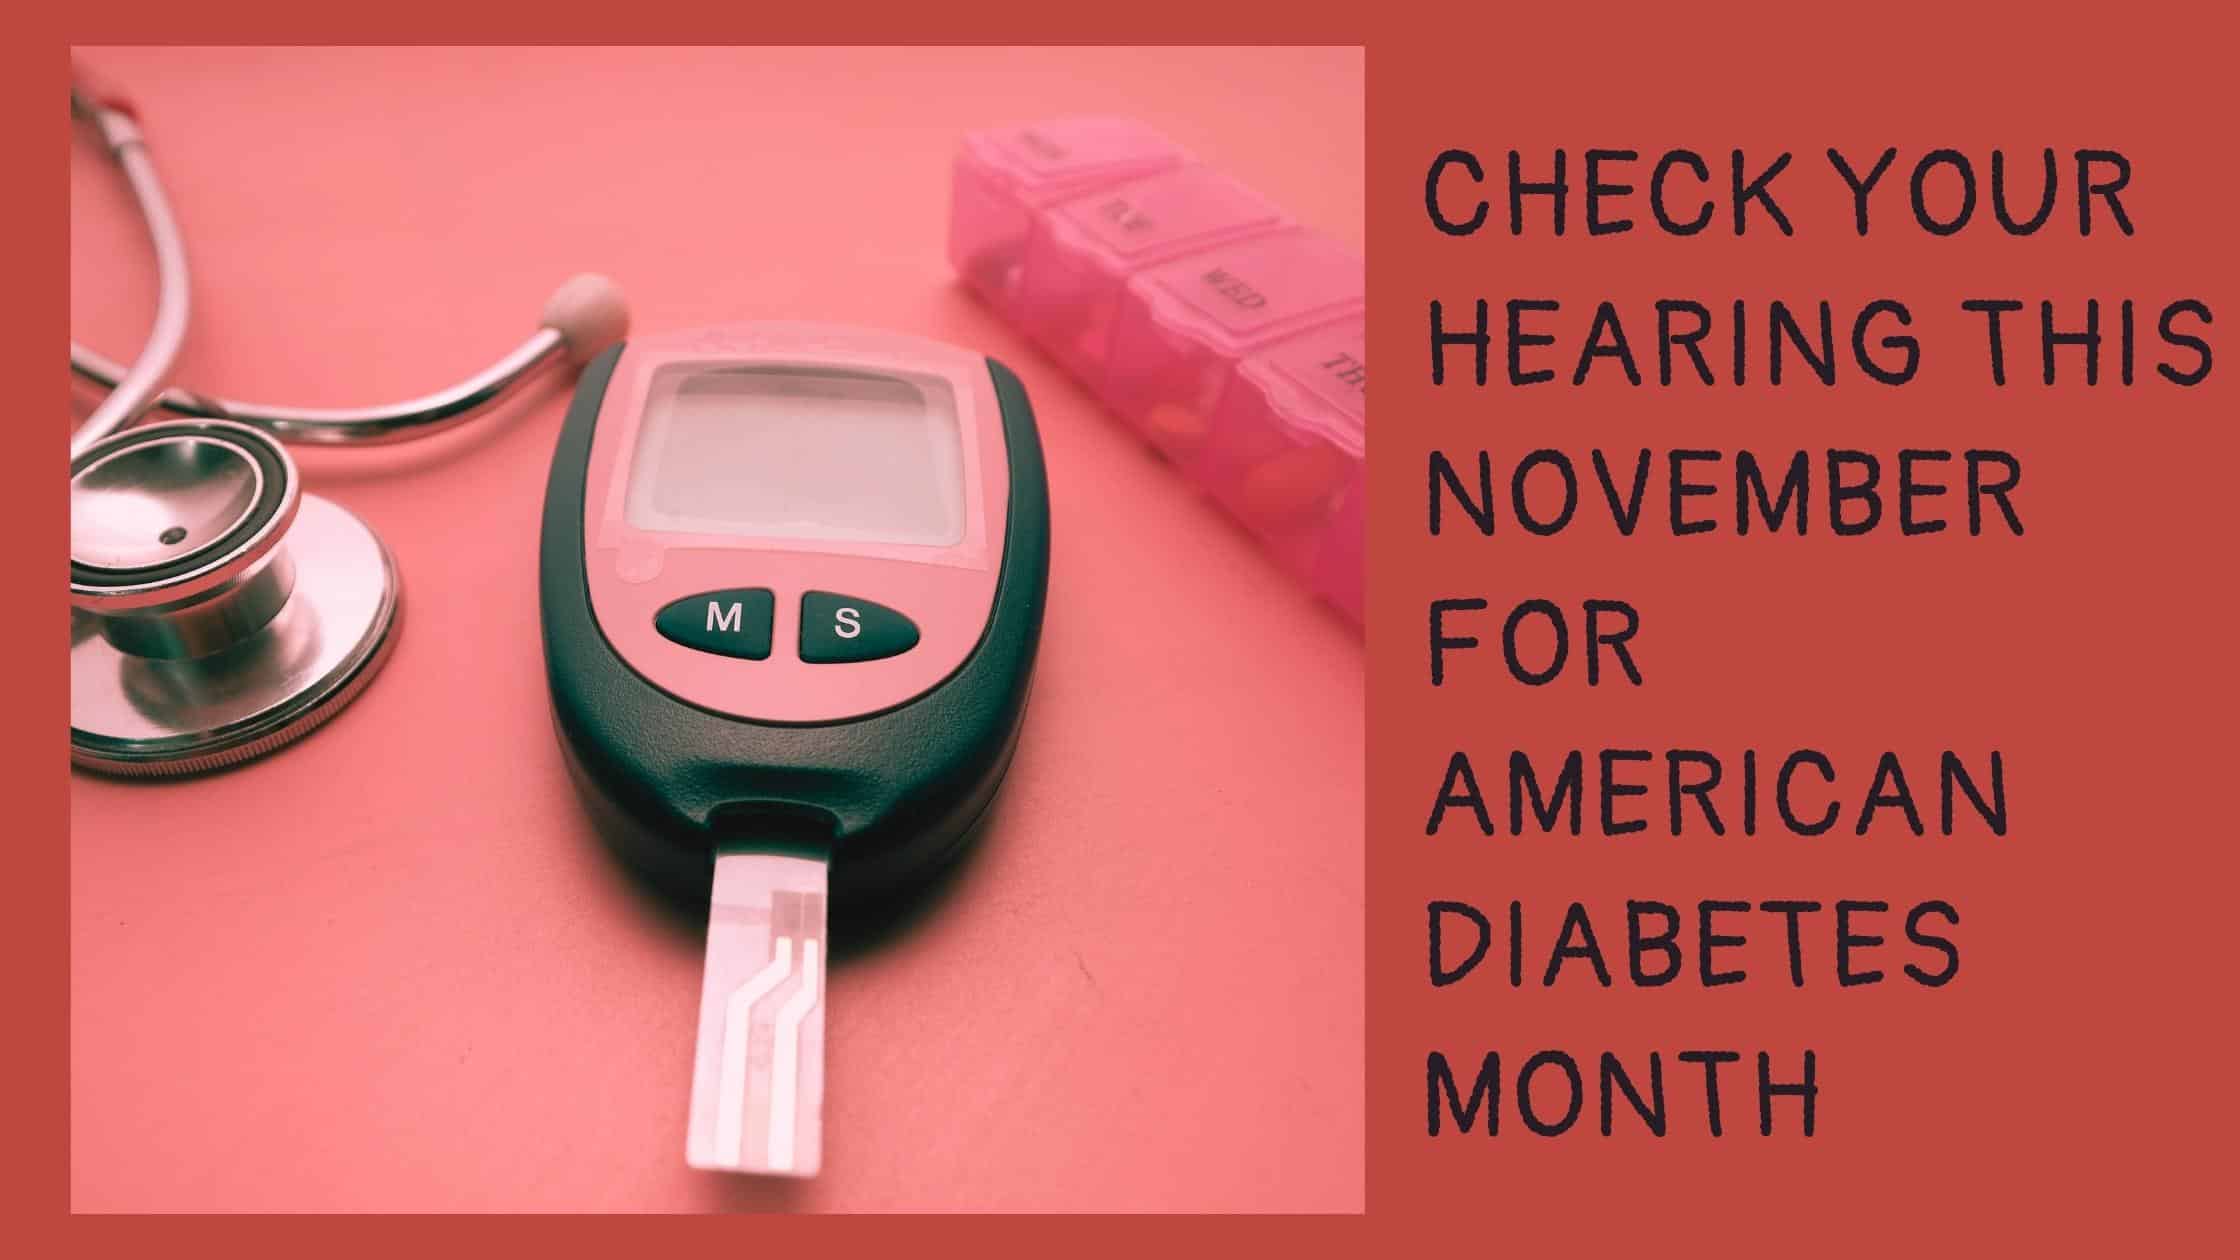 Check your hearing this November for American diabetes month